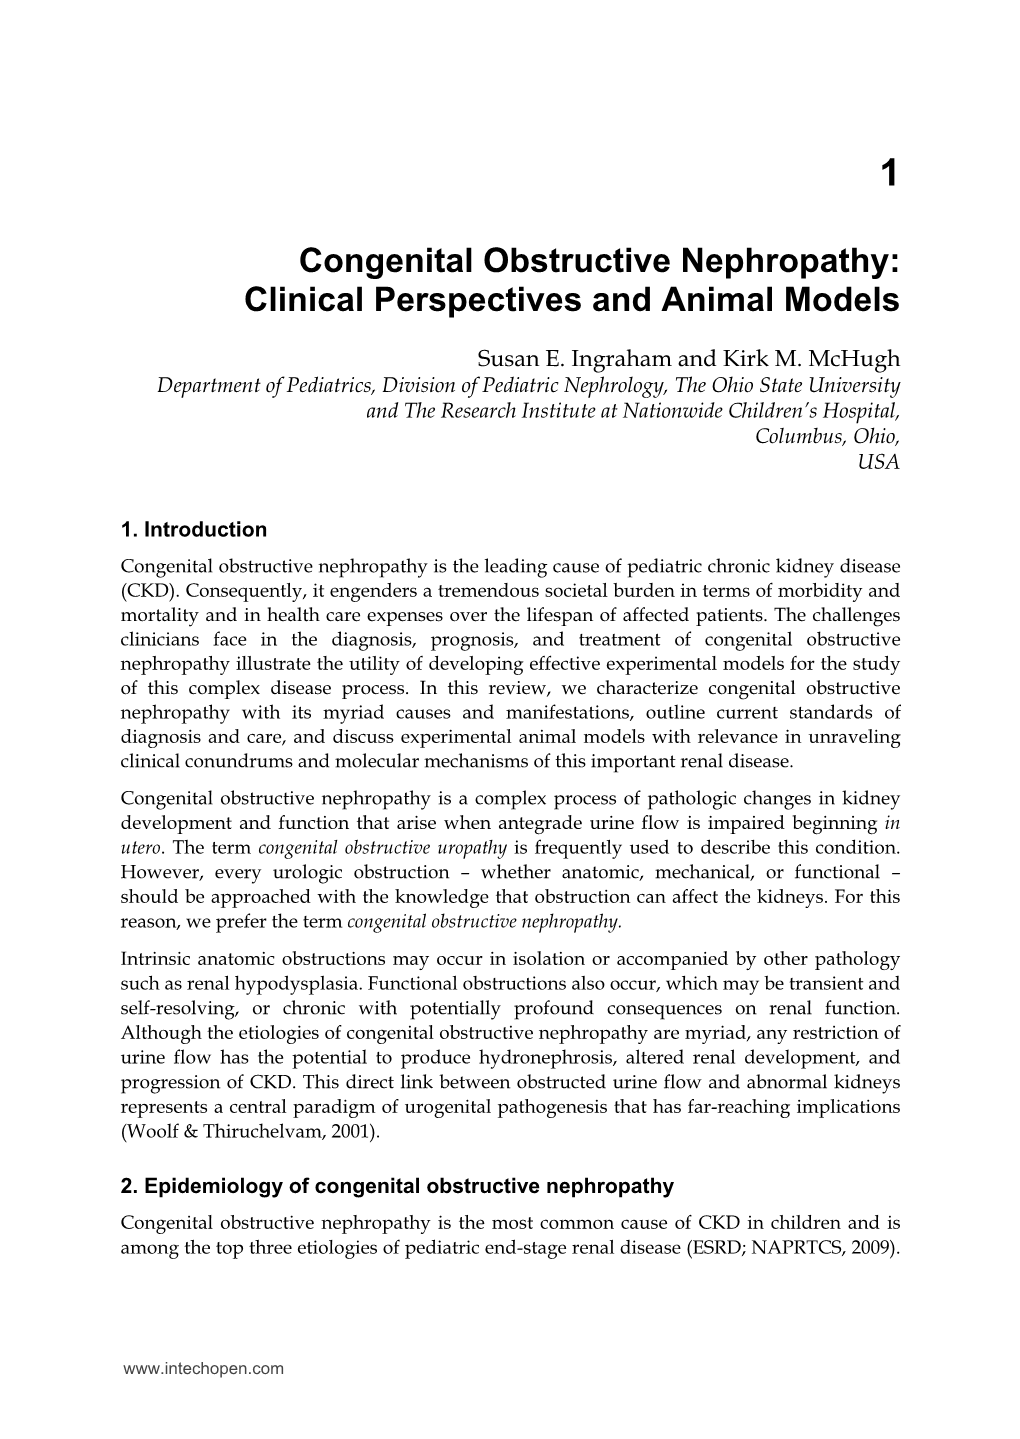 Congenital Obstructive Nephropathy: Clinical Perspectives and Animal Models